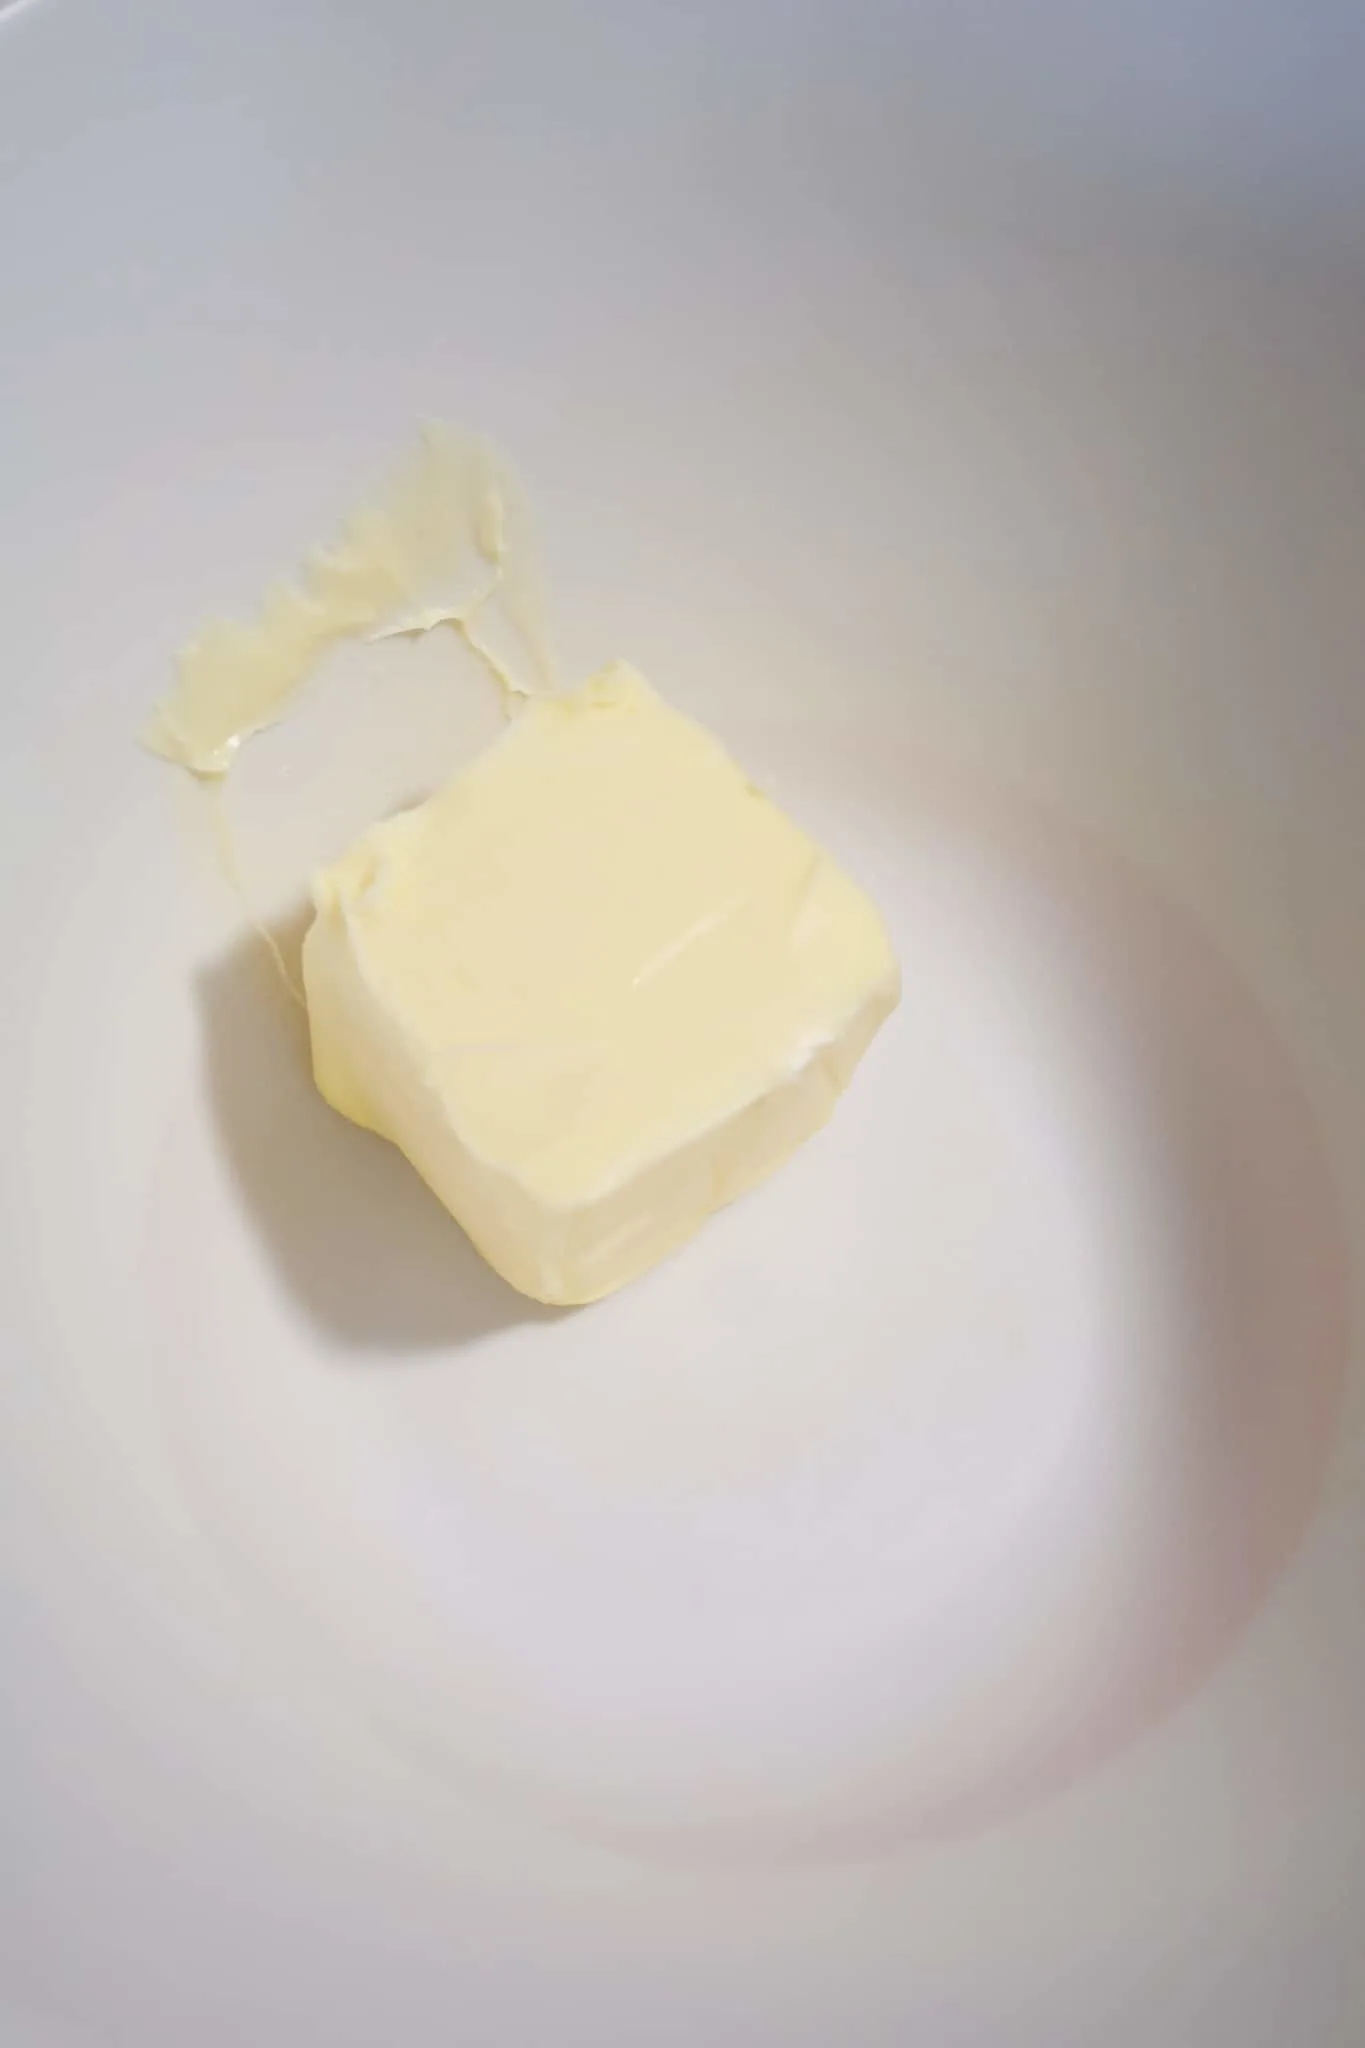 softened butter in a mixing bowl